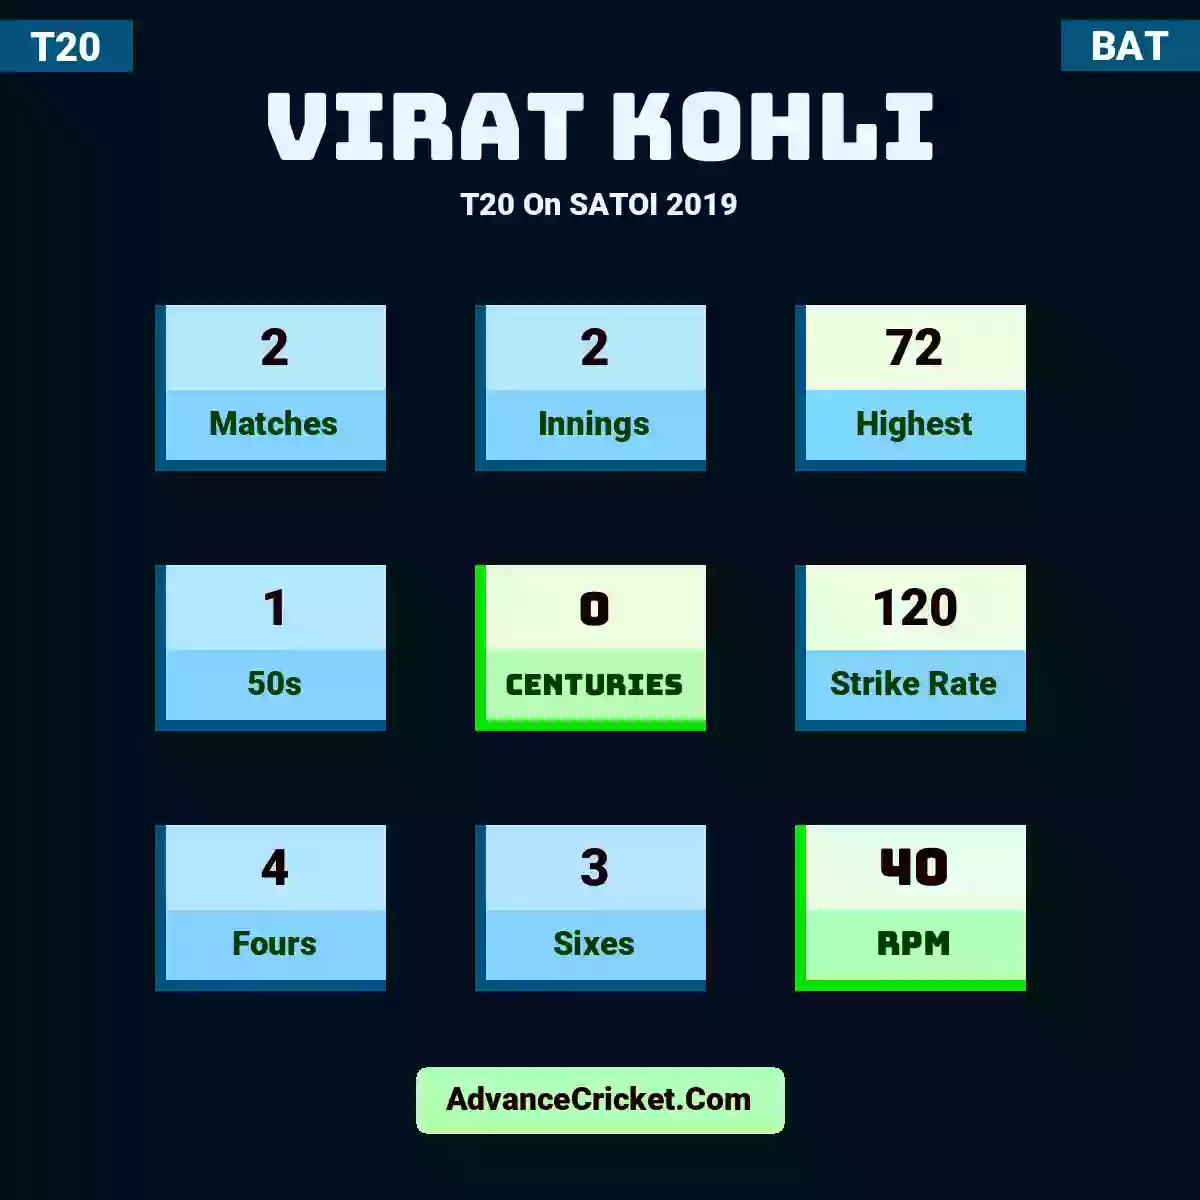 Virat Kohli T20  On SATOI 2019, Virat Kohli played 2 matches, scored 72 runs as highest, 1 half-centuries, and 0 centuries, with a strike rate of 120. V.Kohli hit 4 fours and 3 sixes, with an RPM of 40.